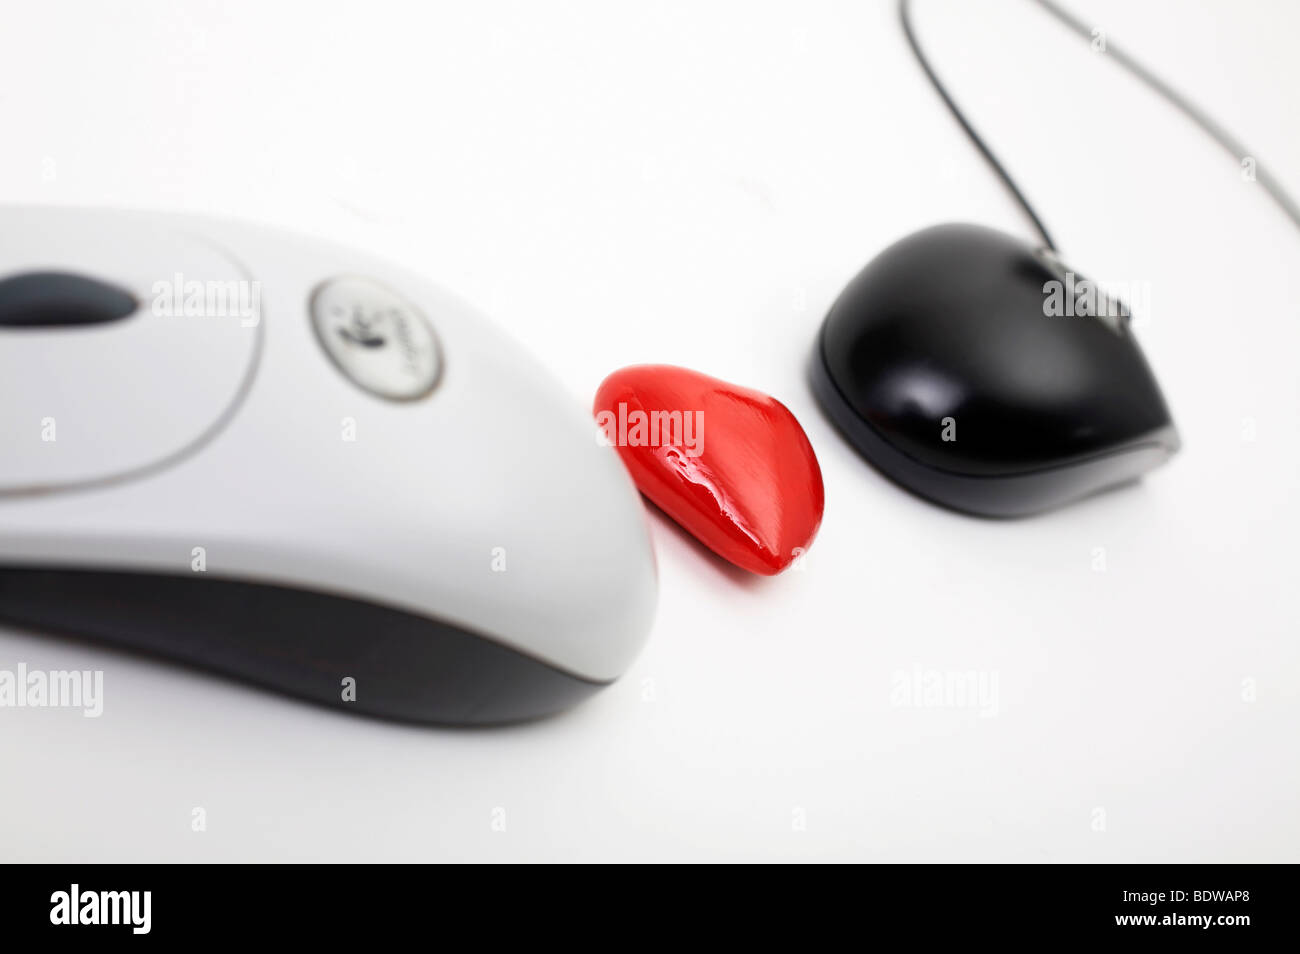 Heart with two computer mice, online dating Stock Photo